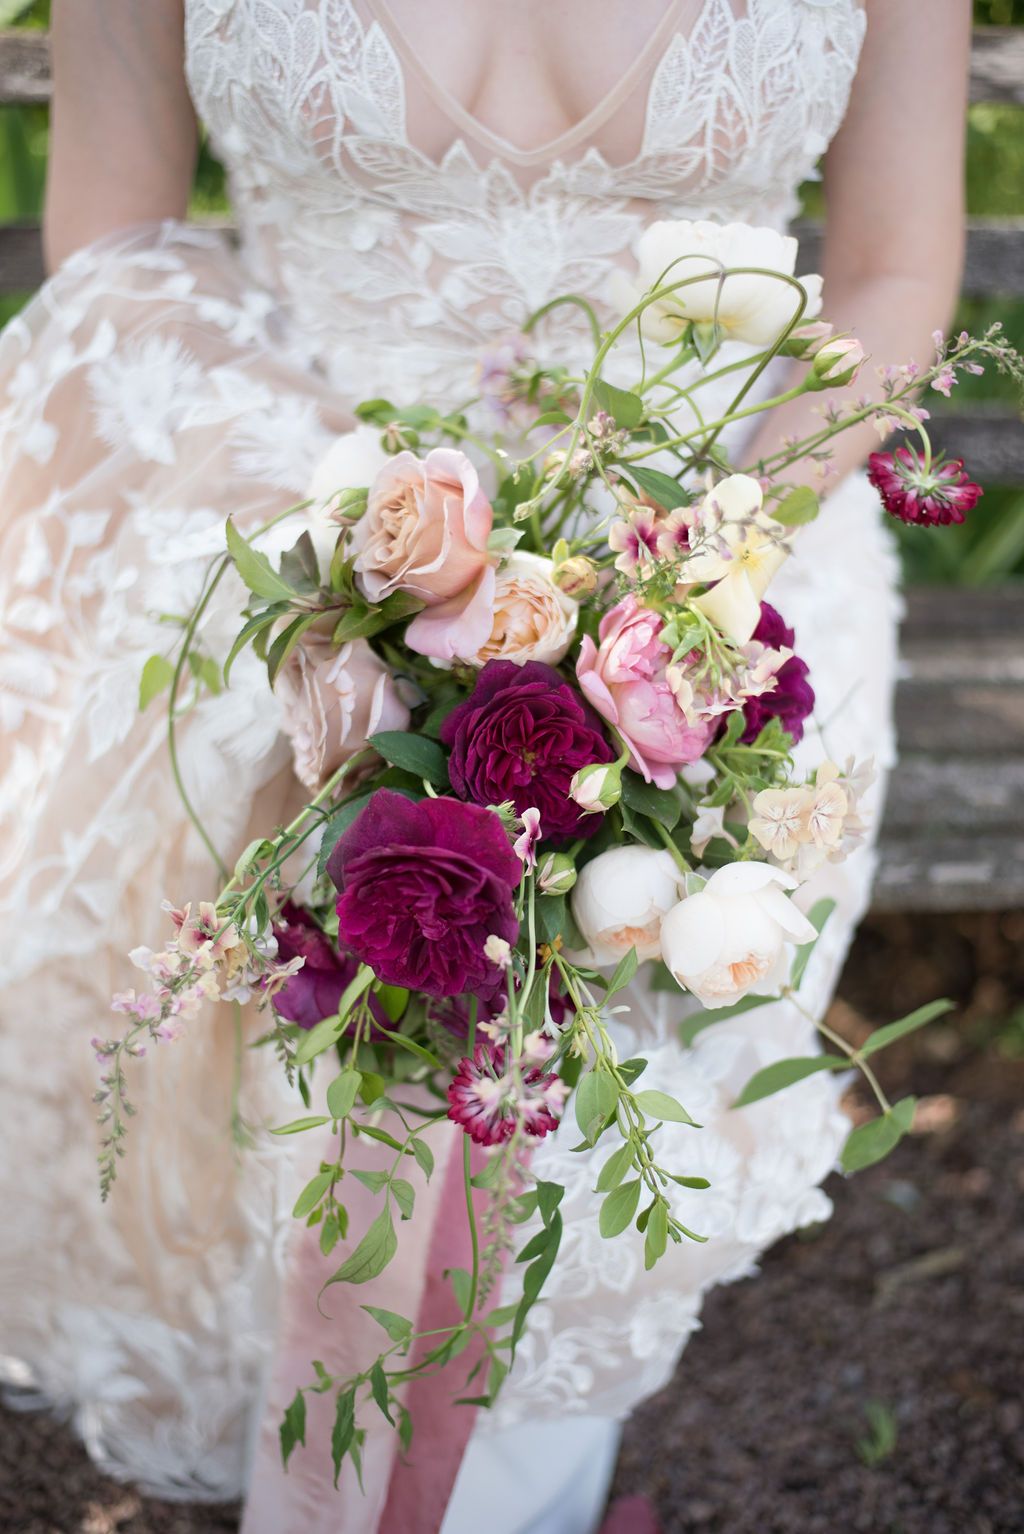 Bridal bouquet with wine, raspberry and blush roses by Clementine Moon Florist